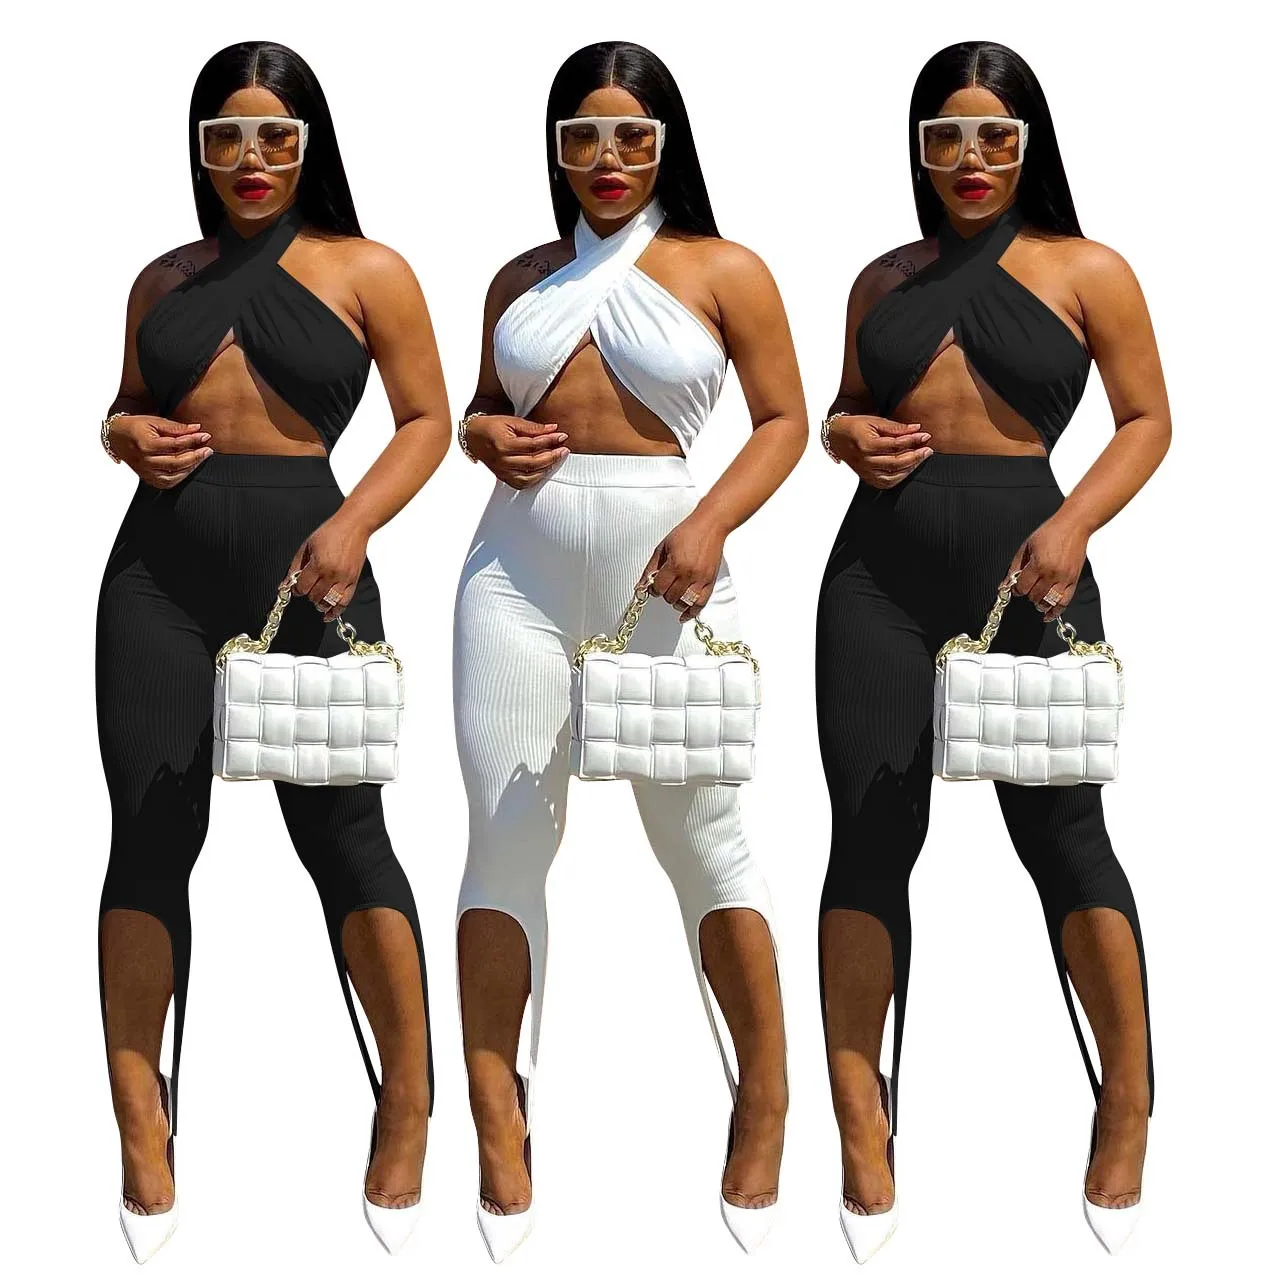 

2022 Spring Hot New Ribbed 2 Piece Set Crop Top + Bodycon High Slit Leggings Party Nightclub Outfits Bulk Item In Wholesale Lots